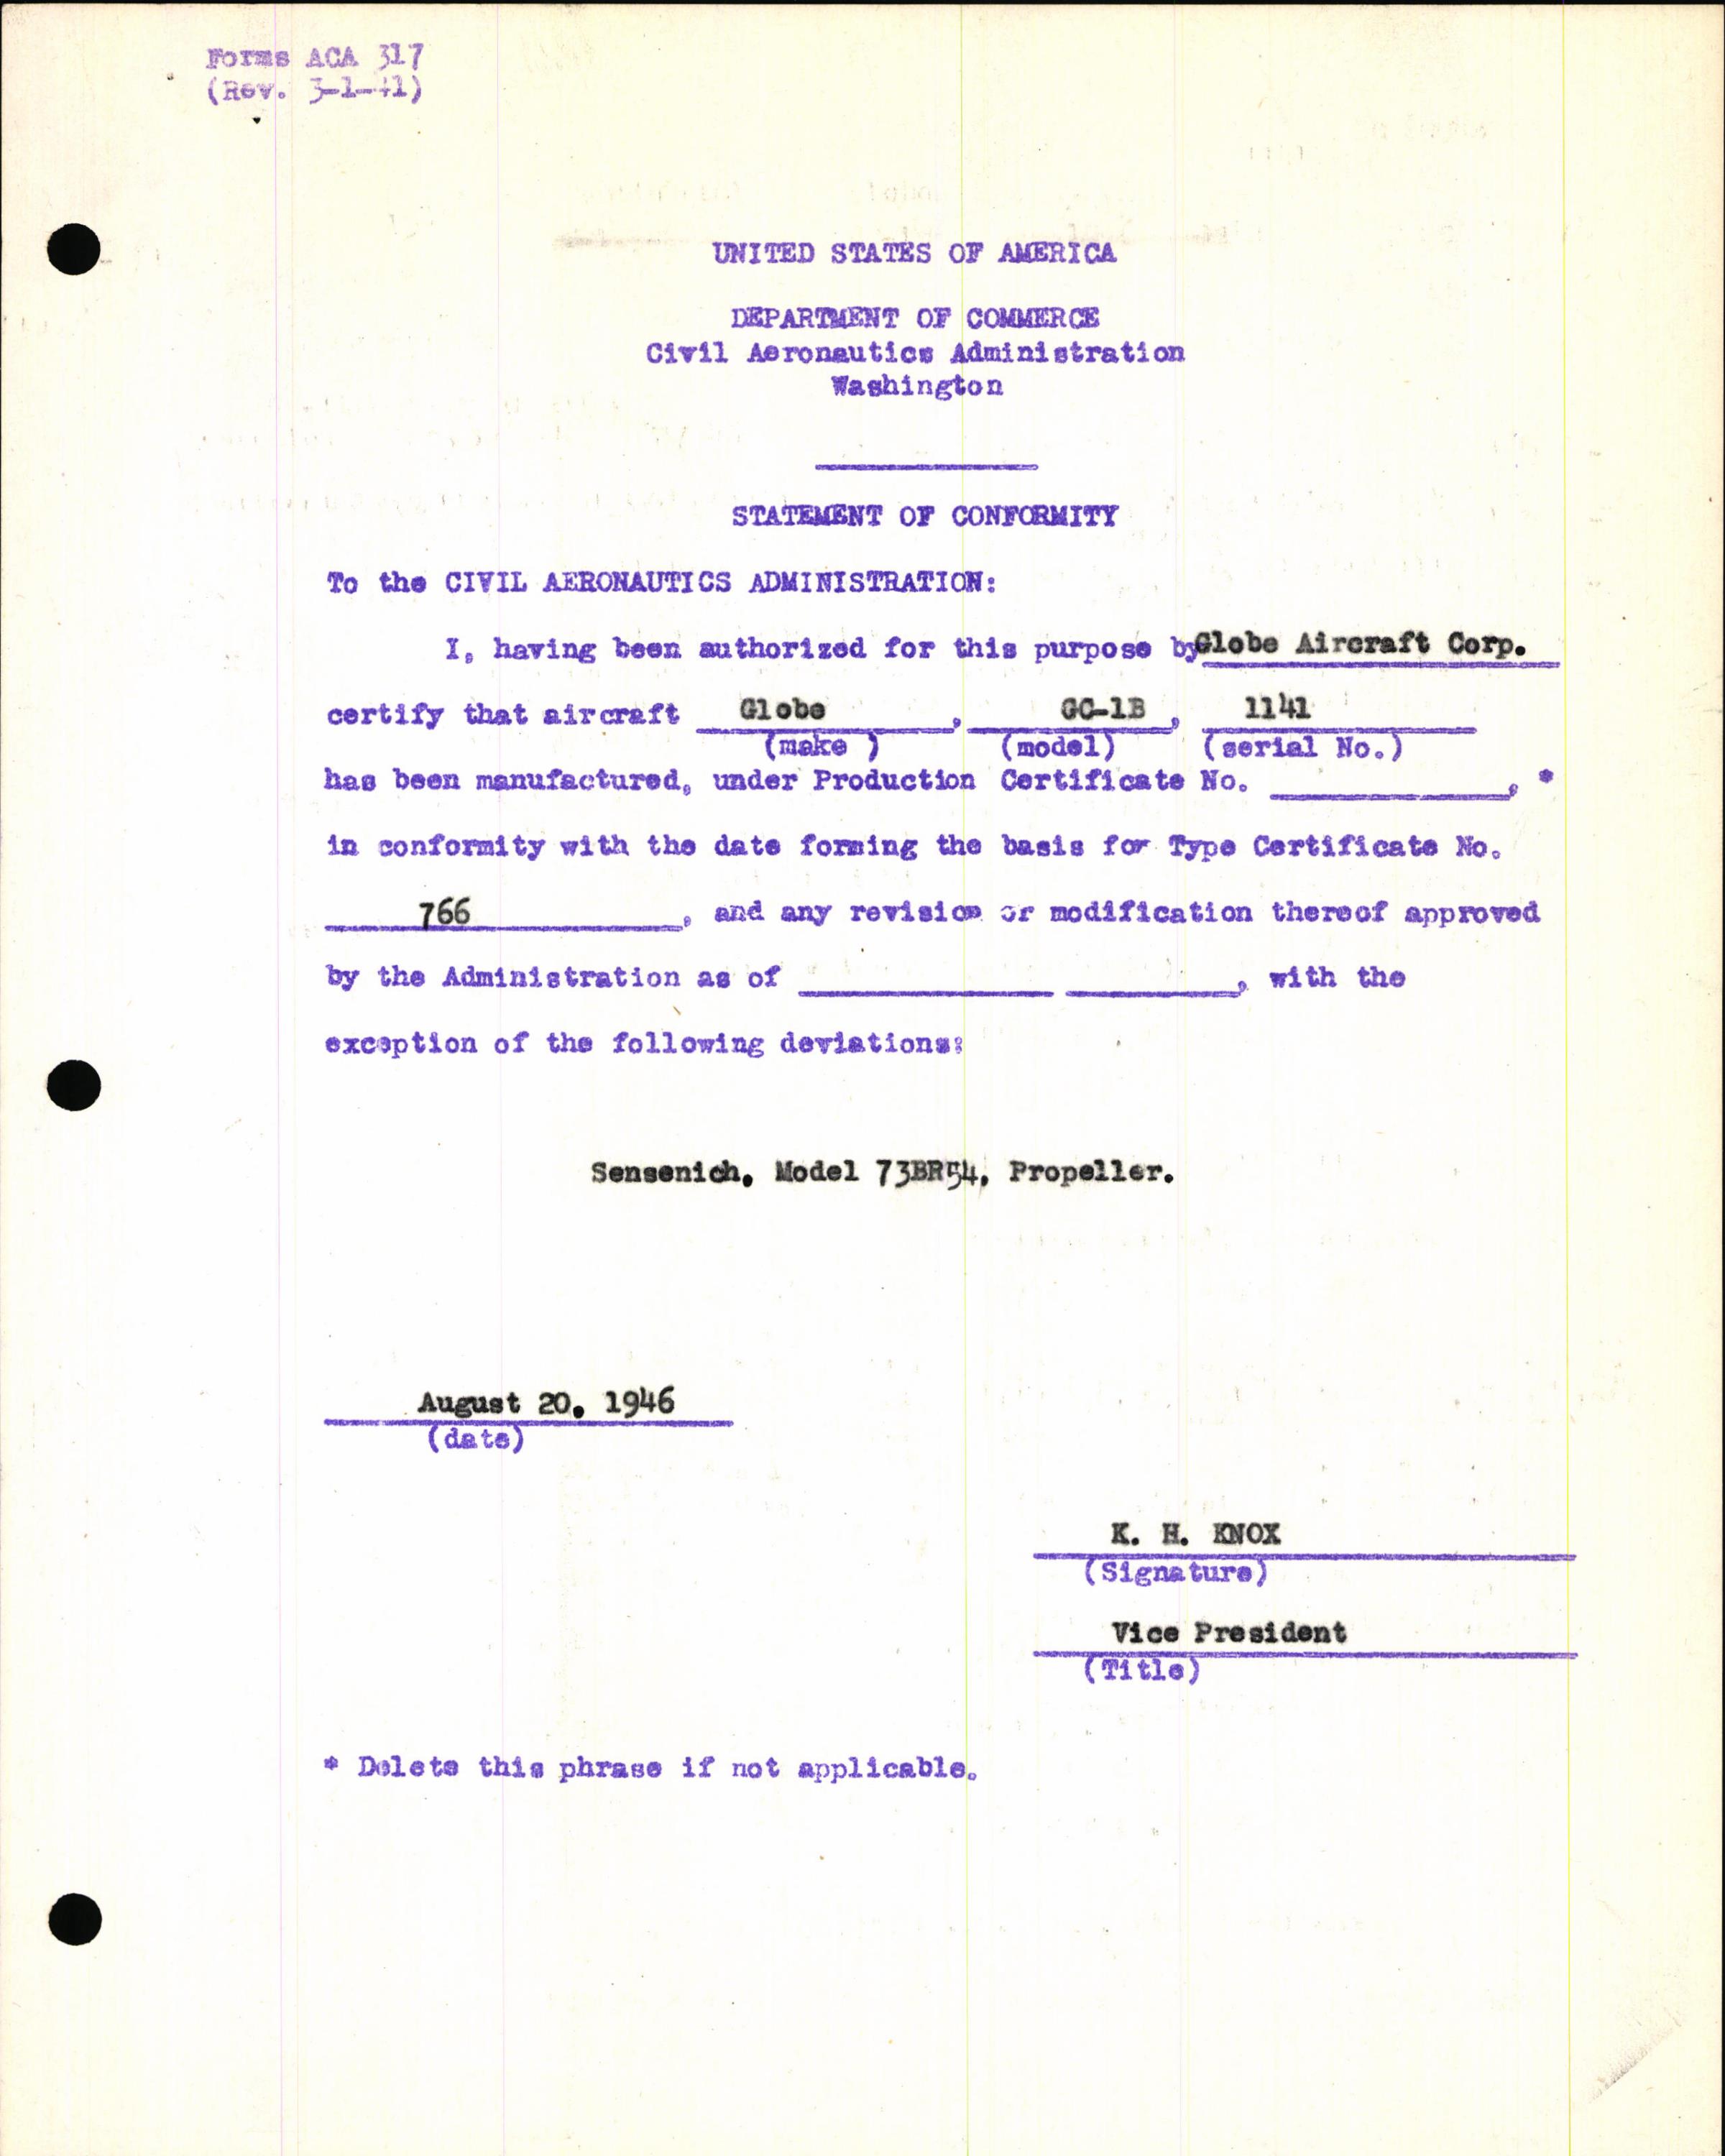 Sample page 7 from AirCorps Library document: Technical Information for Serial Number 1141